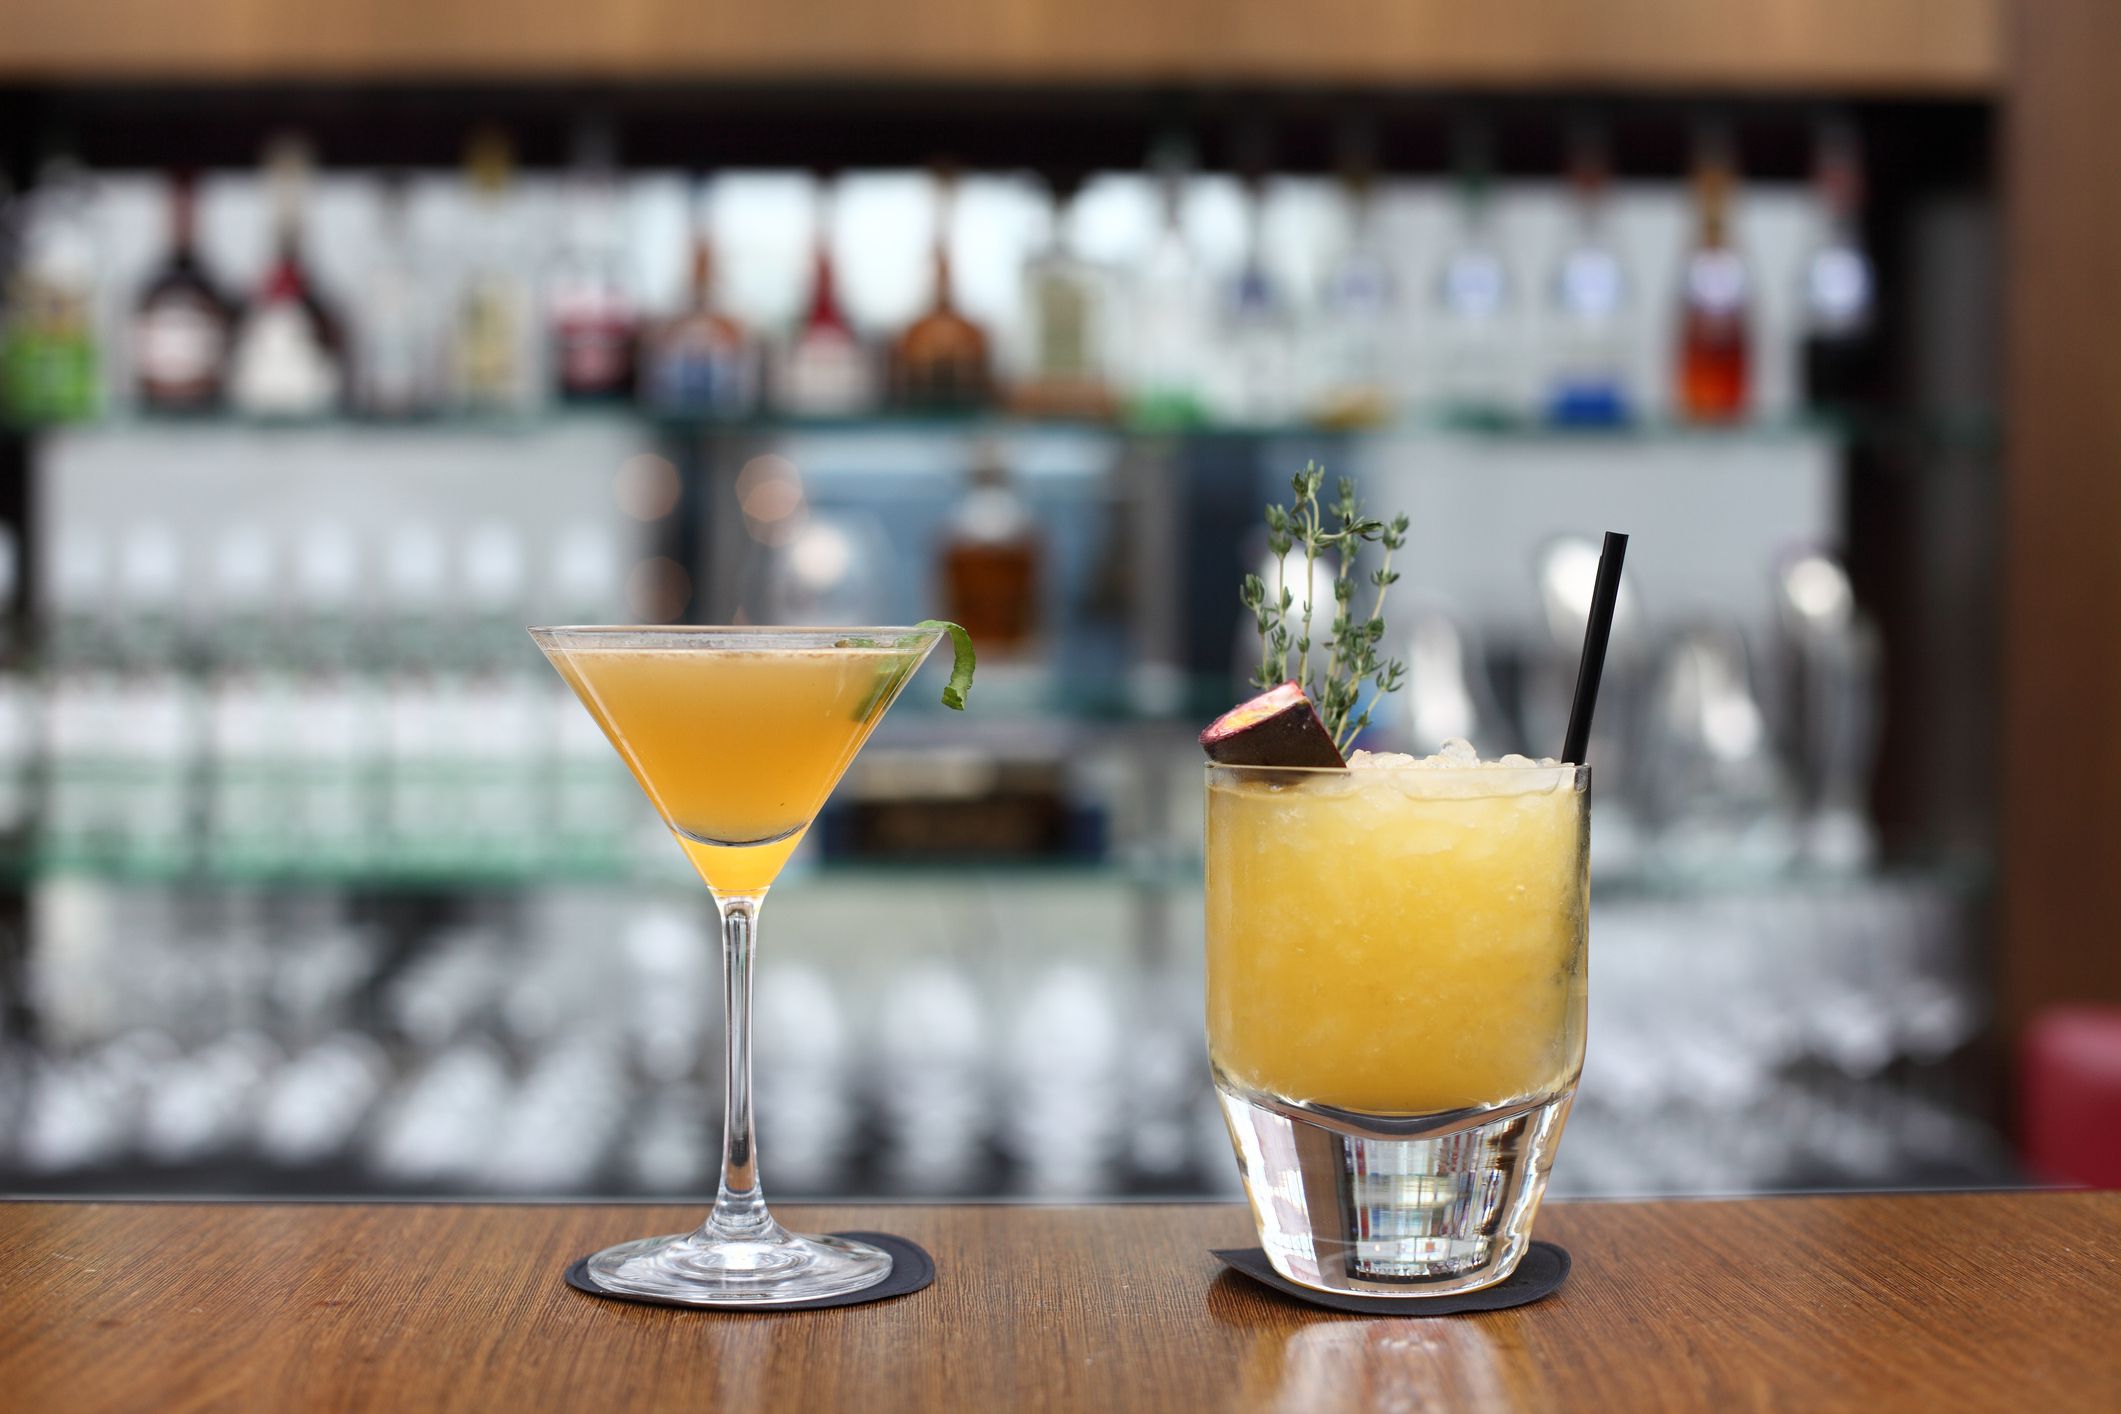 When acquiring equipment for your bar, make informed judgments. Learn about the equipment you will need, the normal expenses, and the best sources to get it.